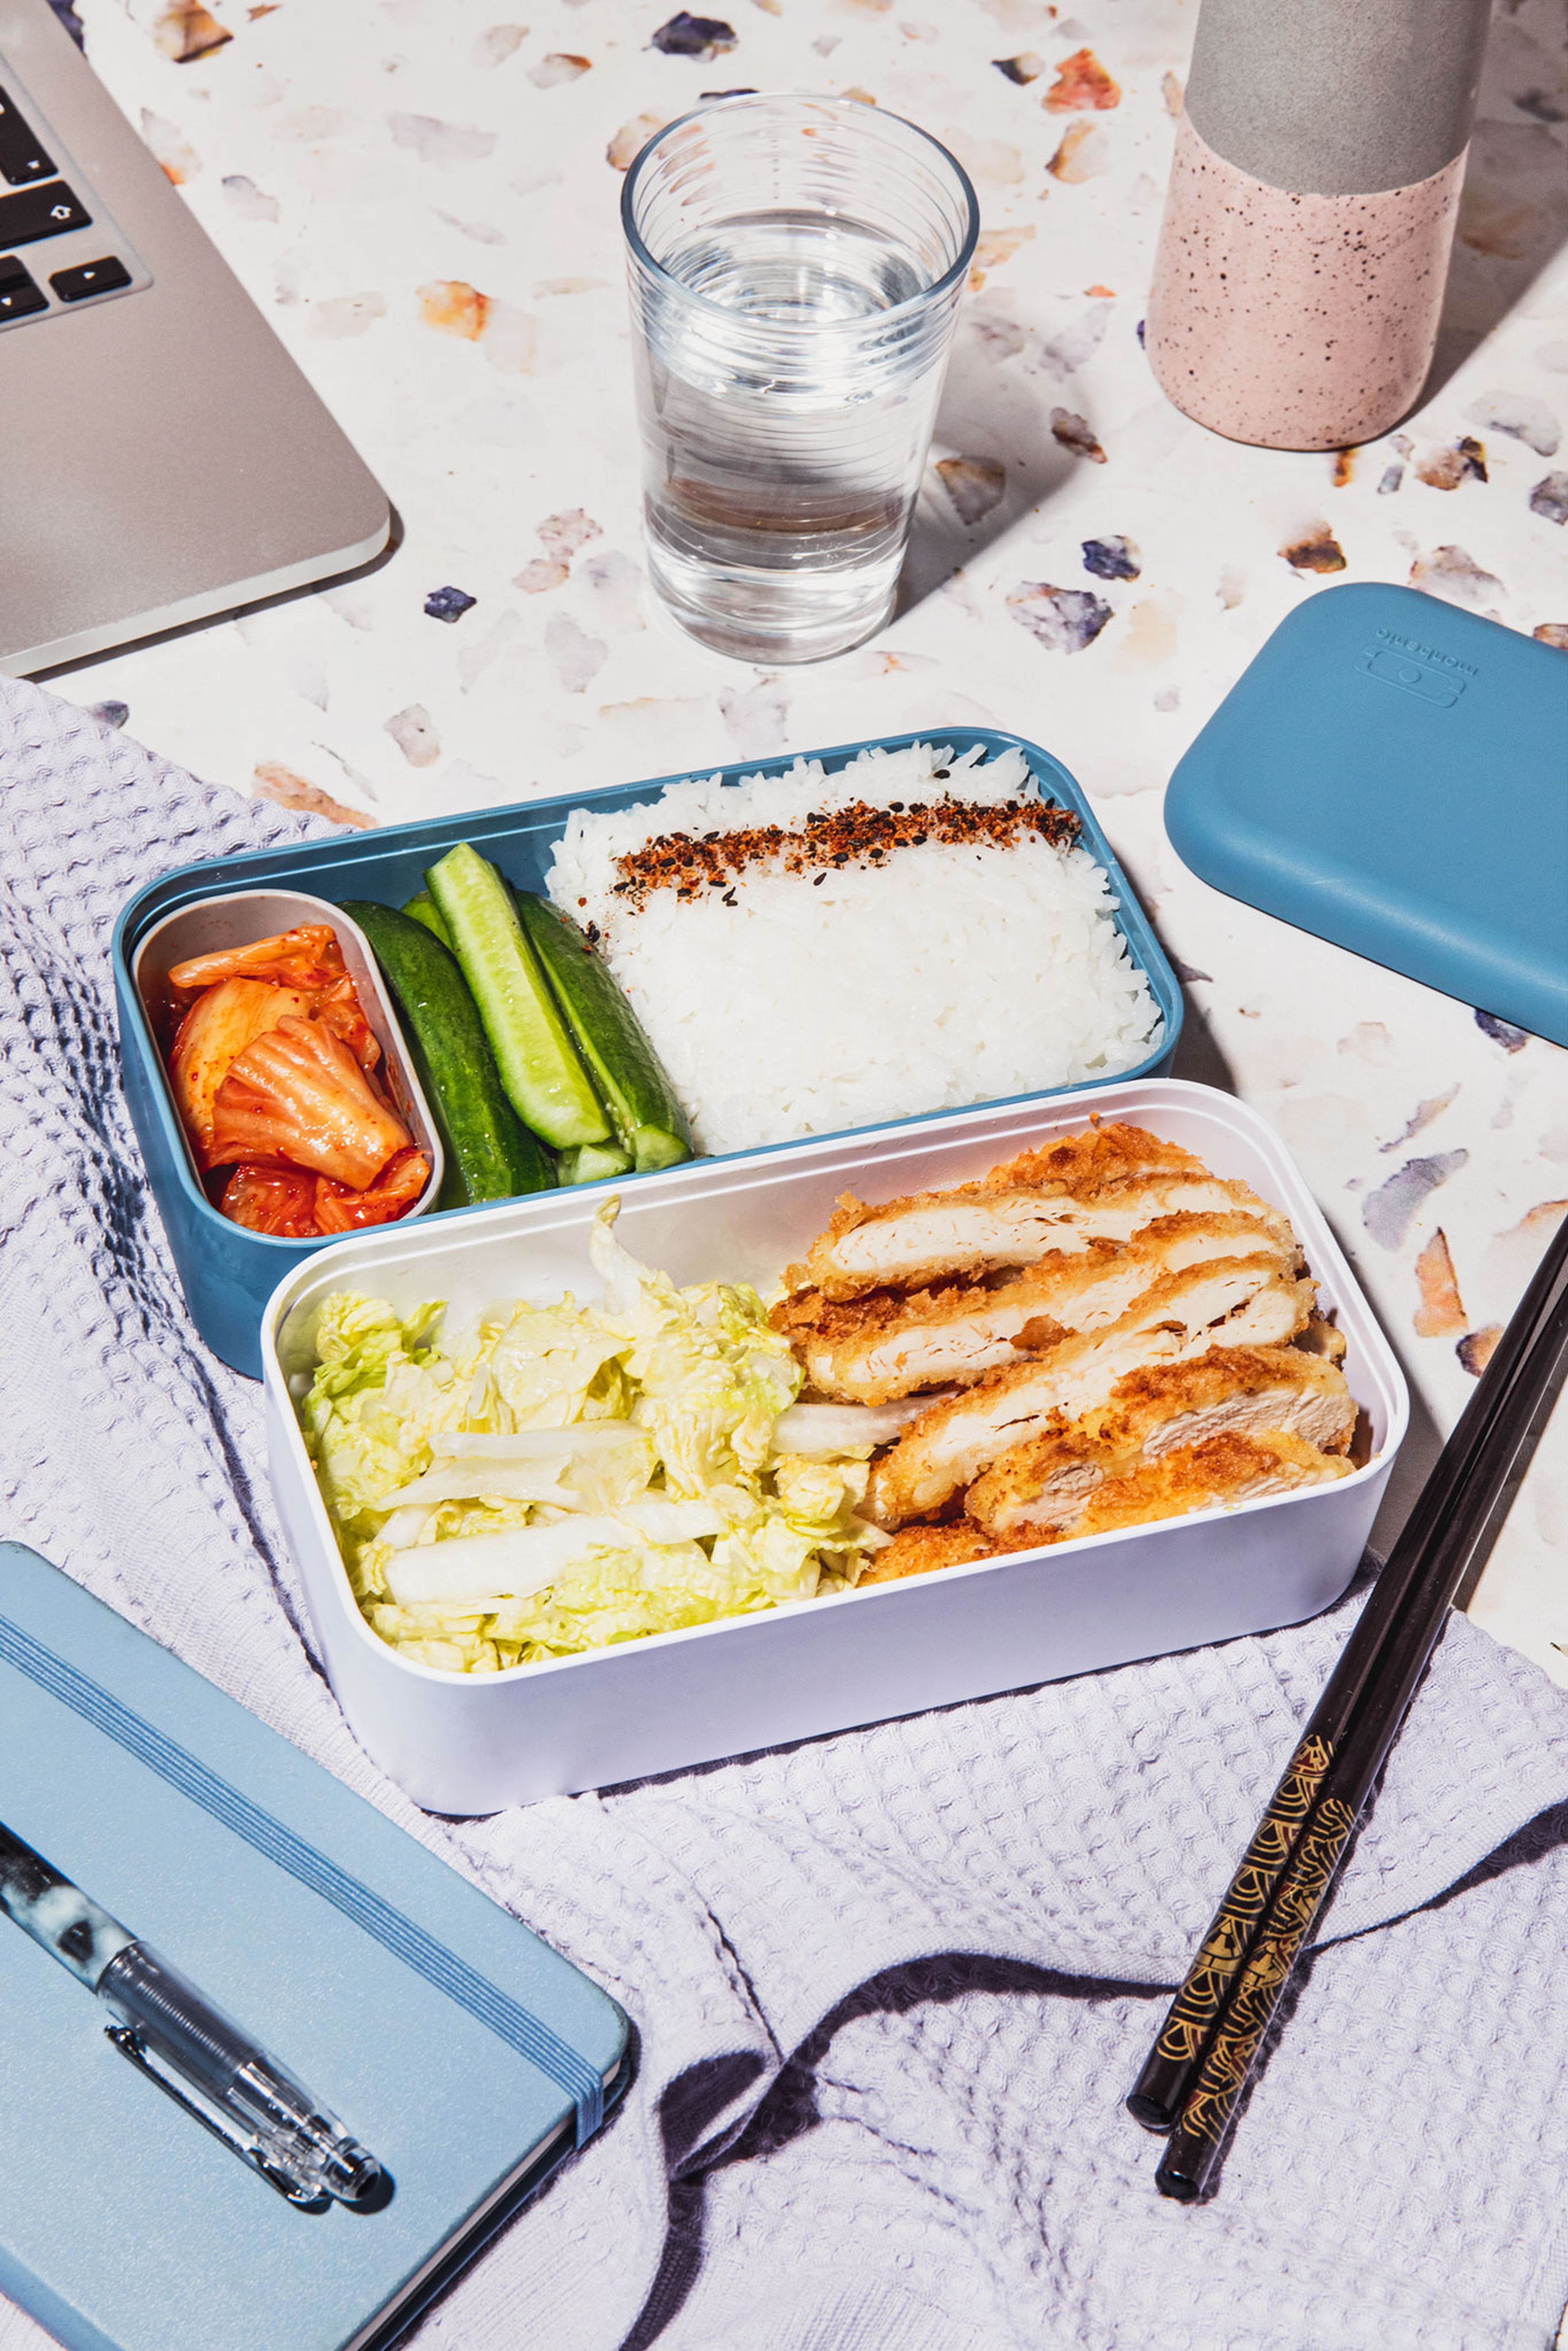 The Breastest News: Review: Munchkin Mealtime Bento Box